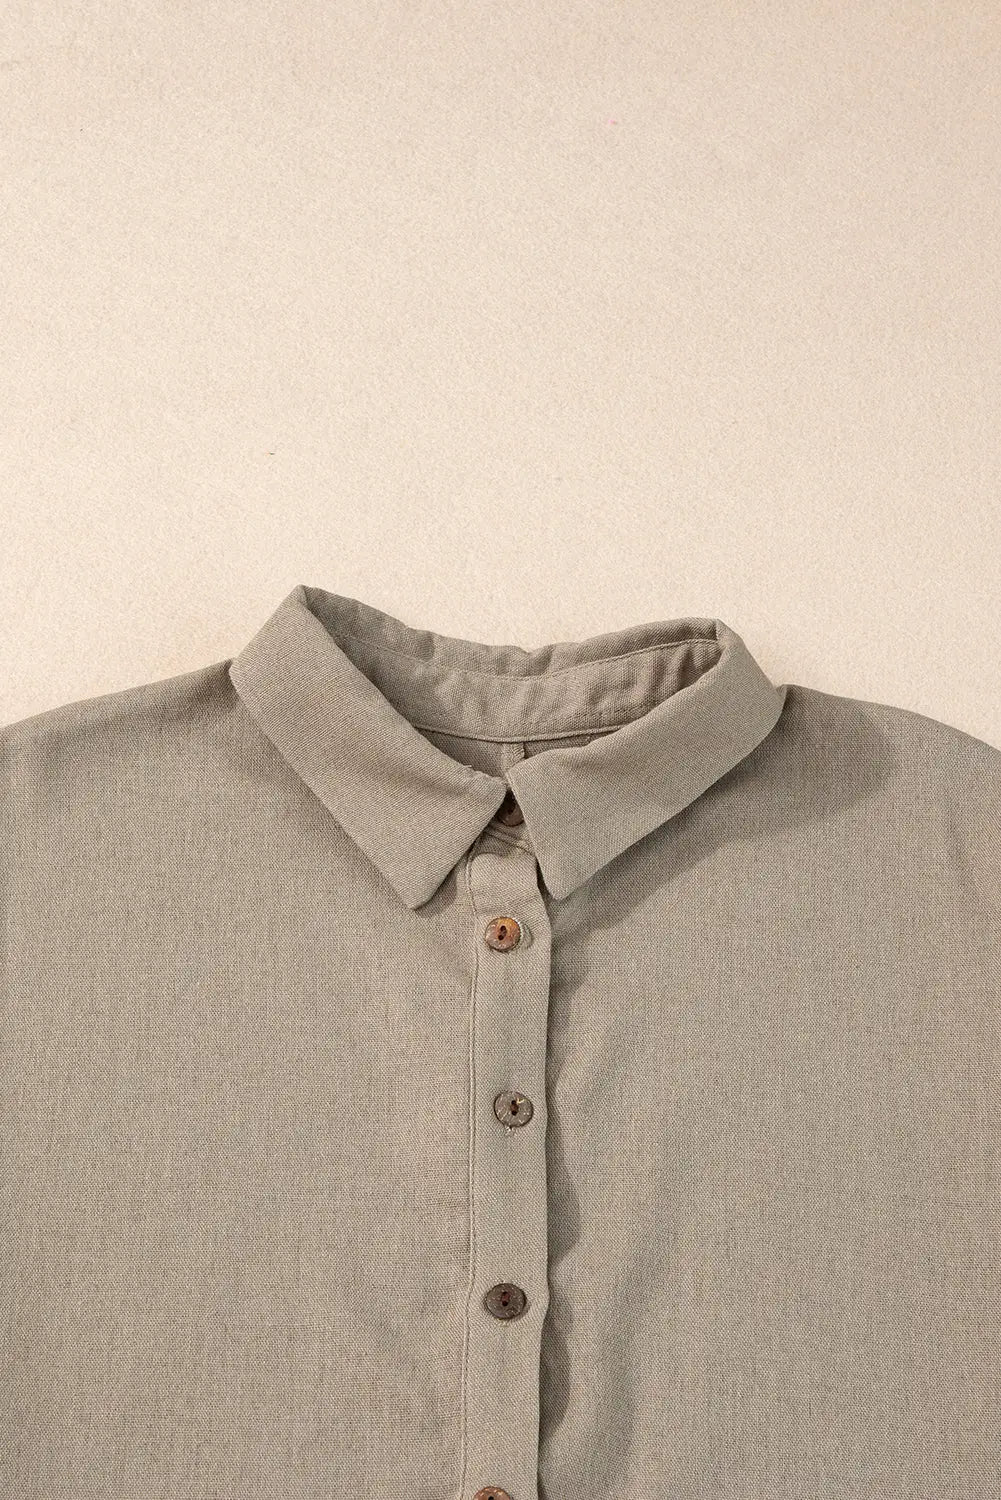 Simply taupe collared half buttons folded short sleeve oversize top - tops